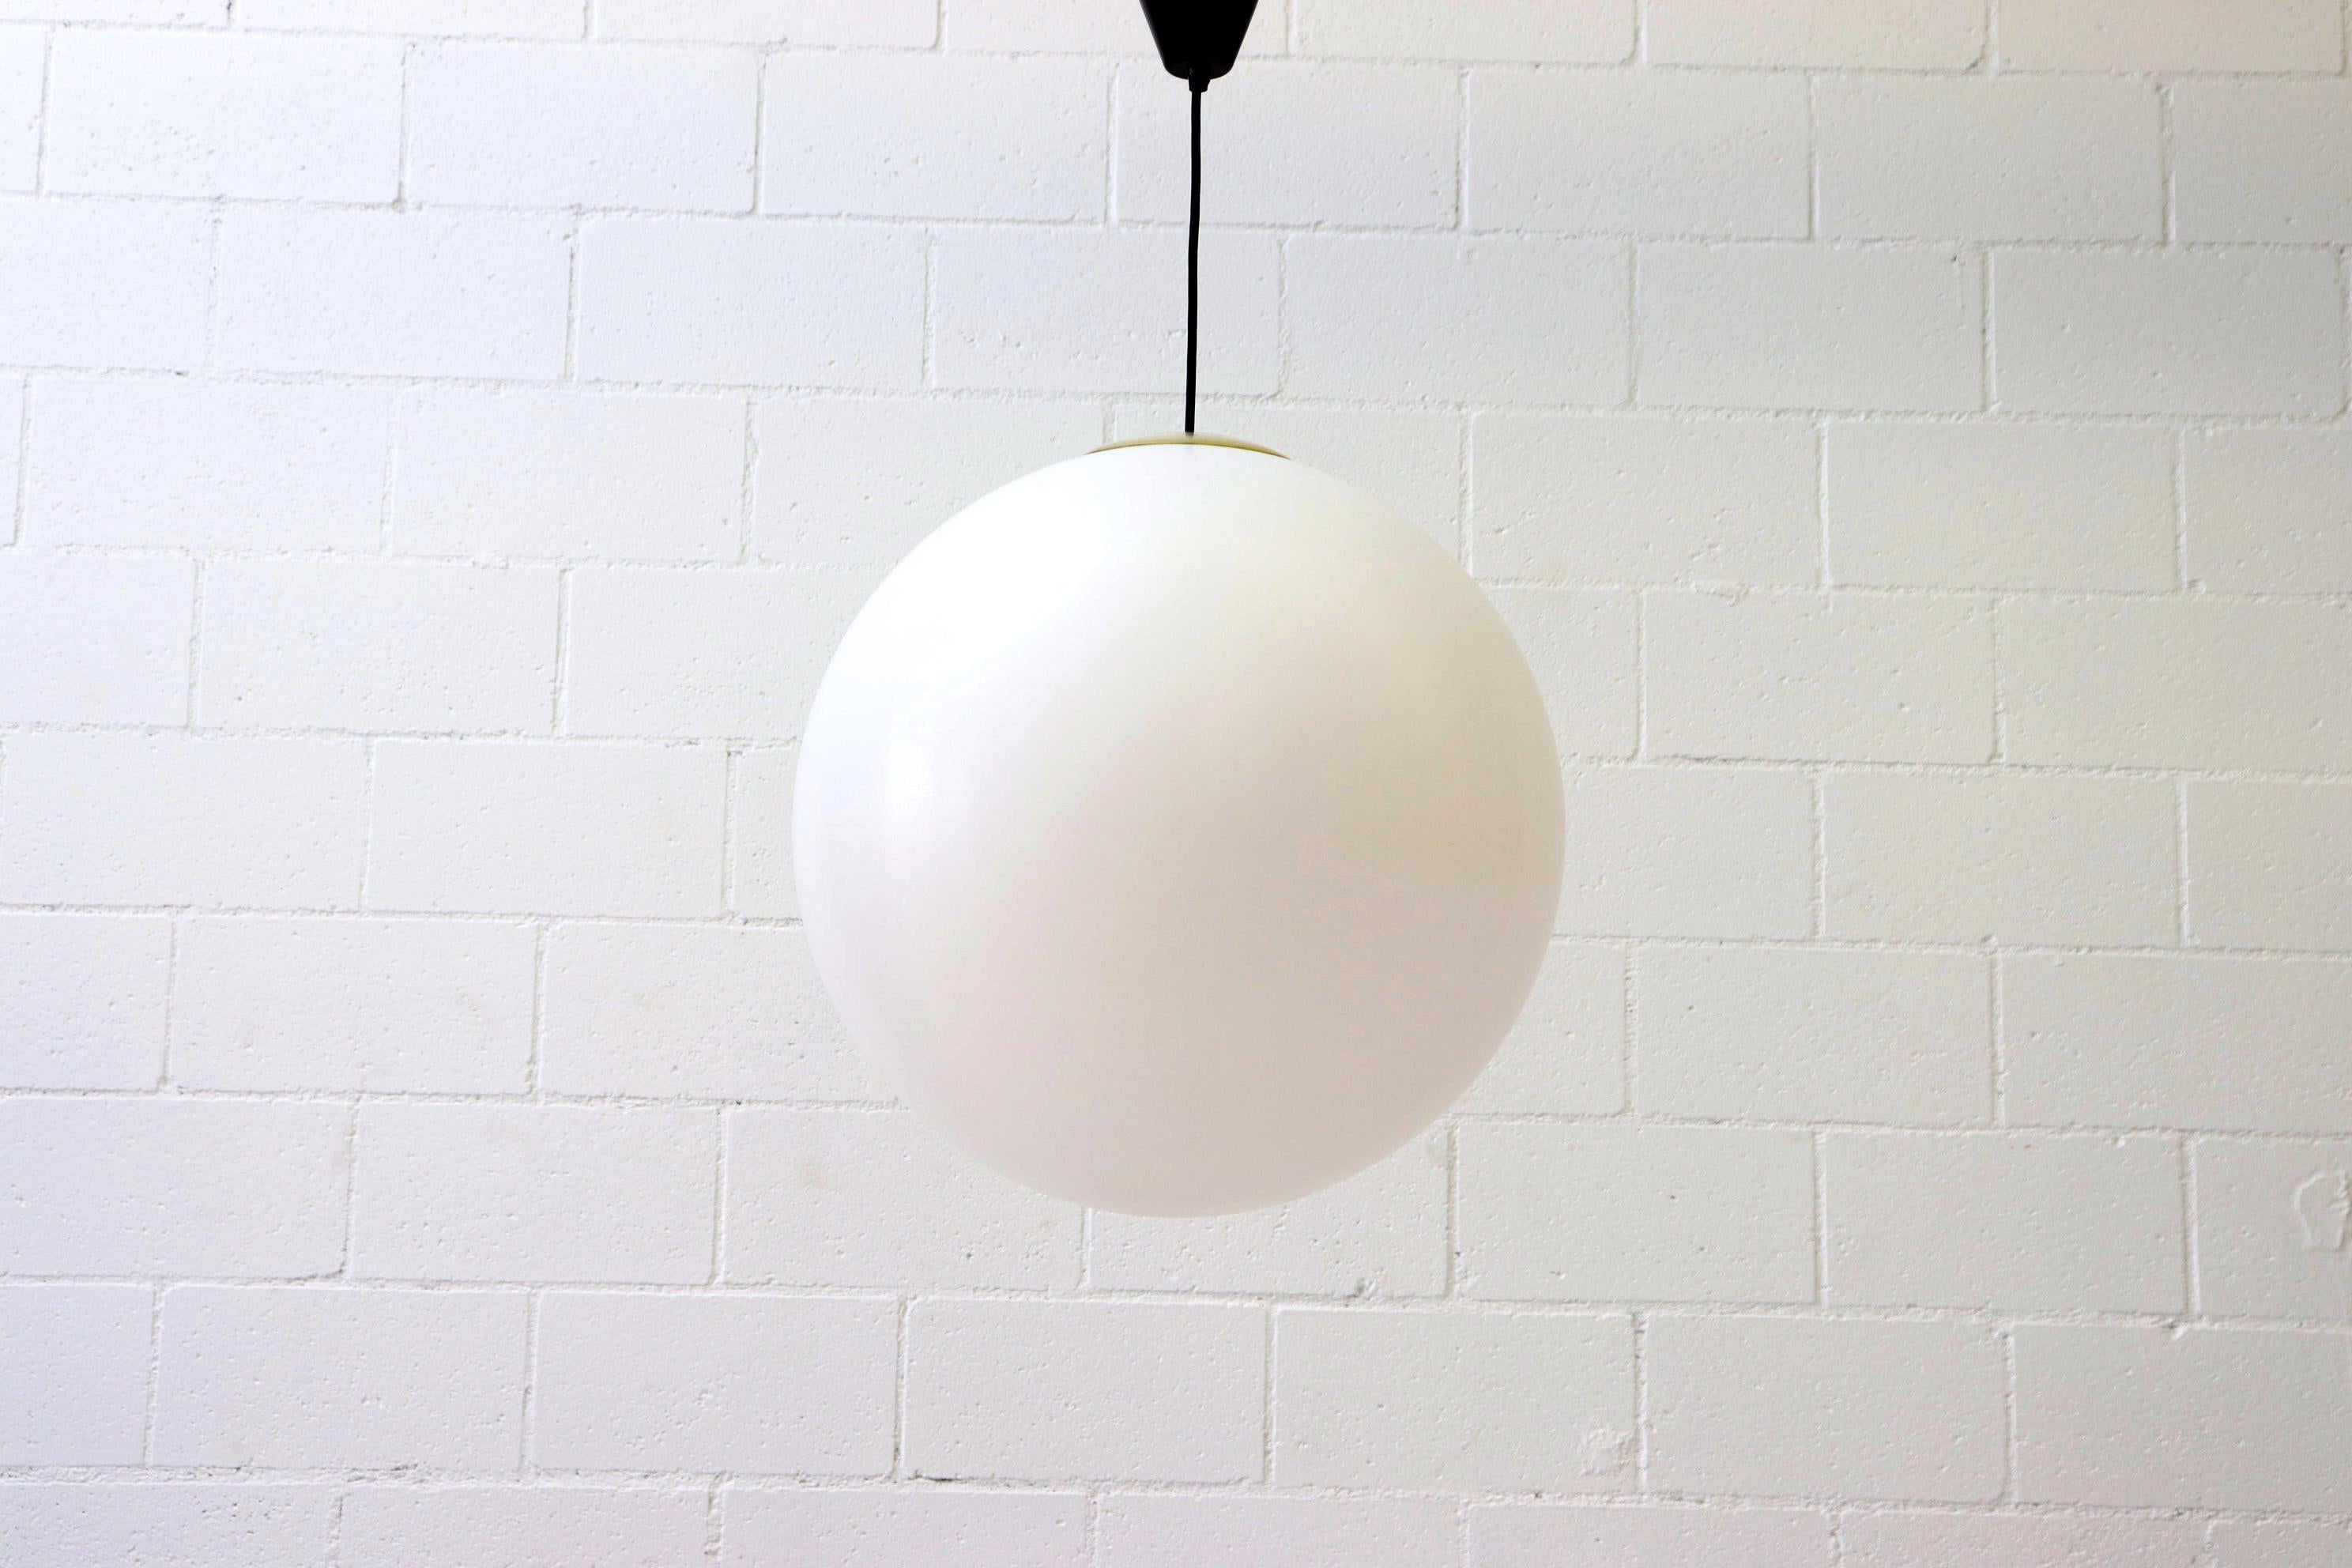 Extra large white acrylic globe lights with clear plastic hardware, black plastic canopy and standard light socket. In original condition with some visible wear consistent with their age and usage.